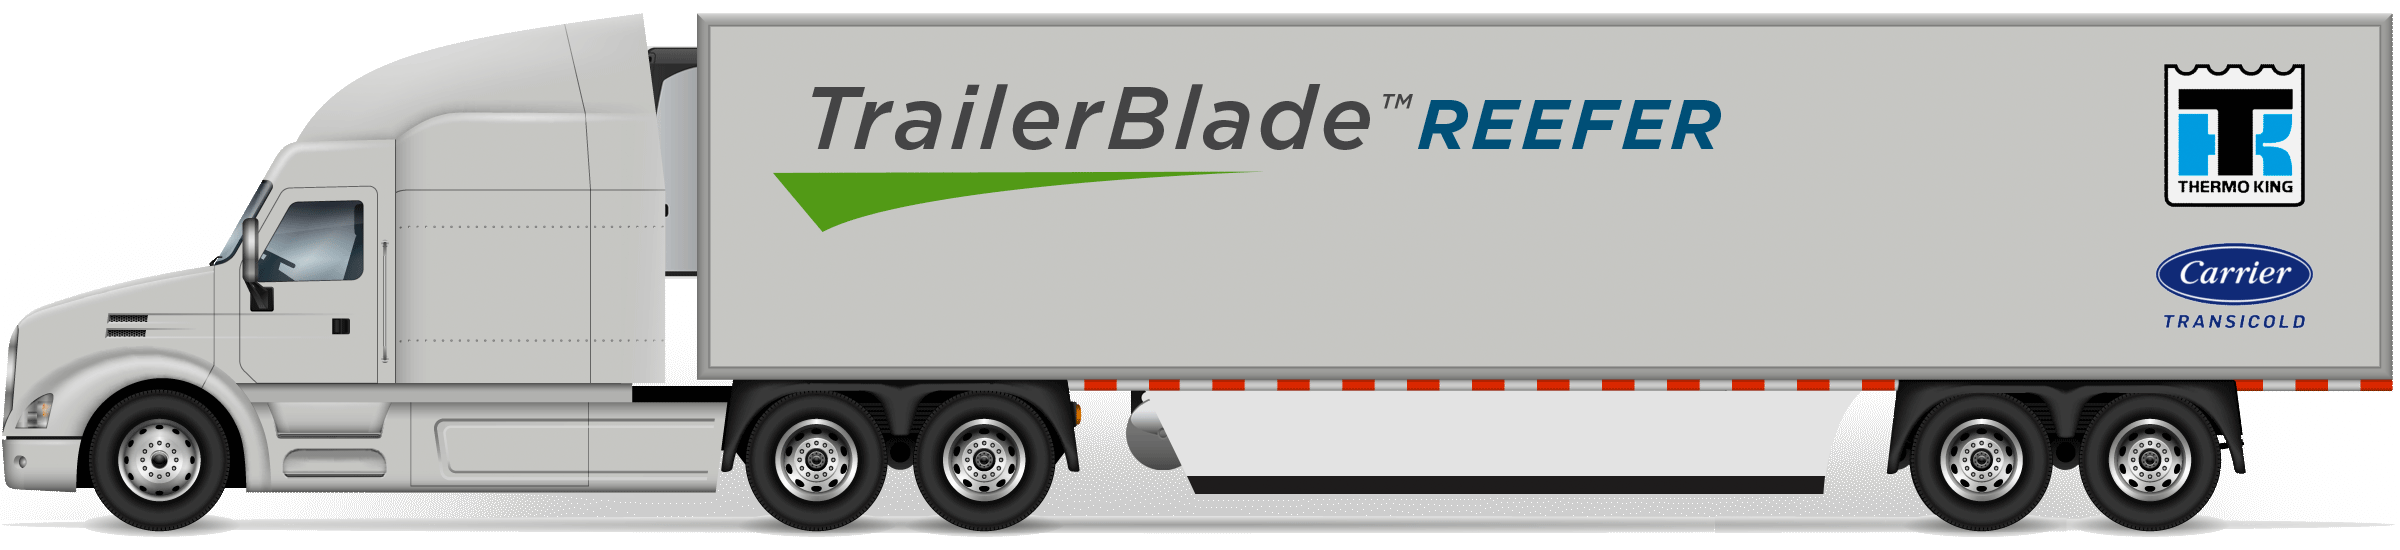 trailerblade reefer thermaking carrier